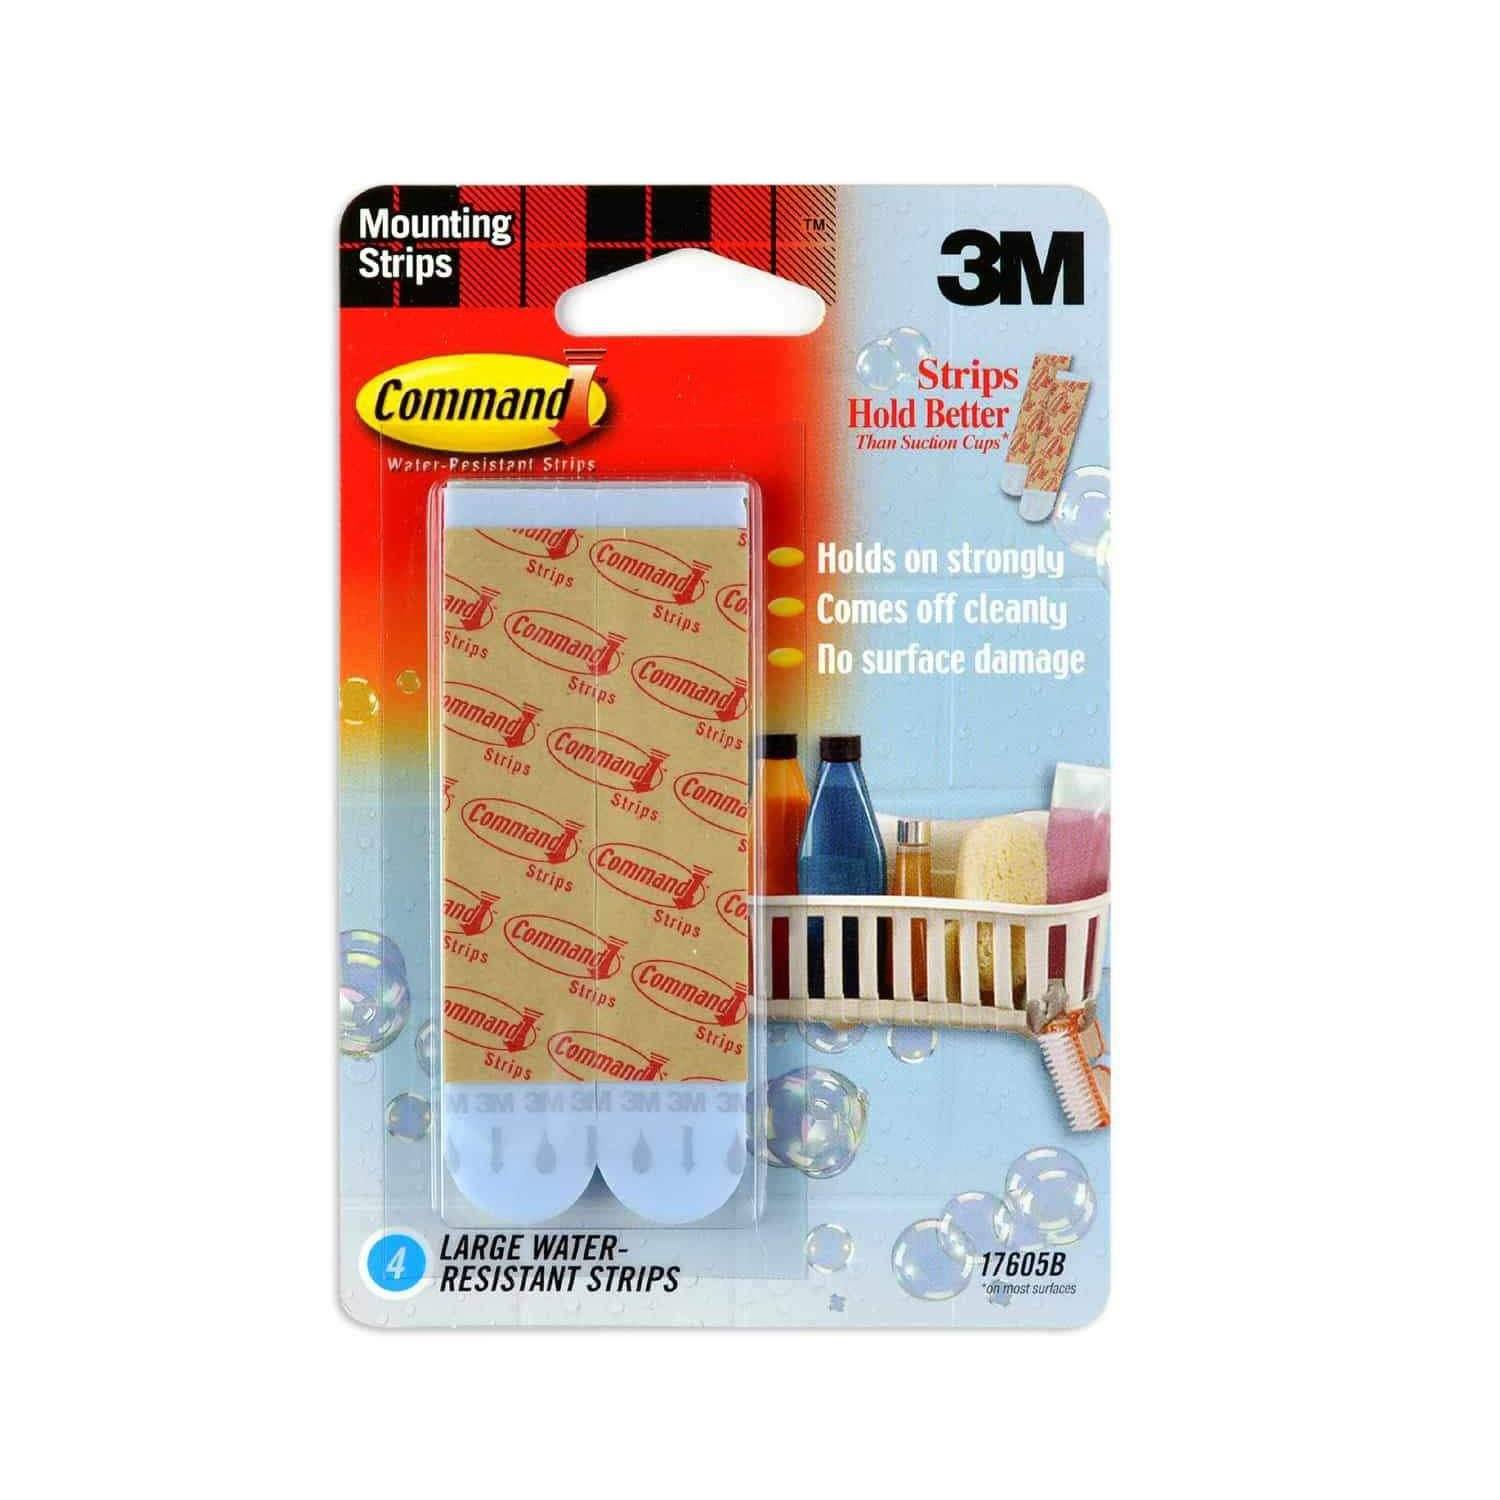 3M Command Water and Heat Resistant Strips - Damage-free adhesive - Dockem